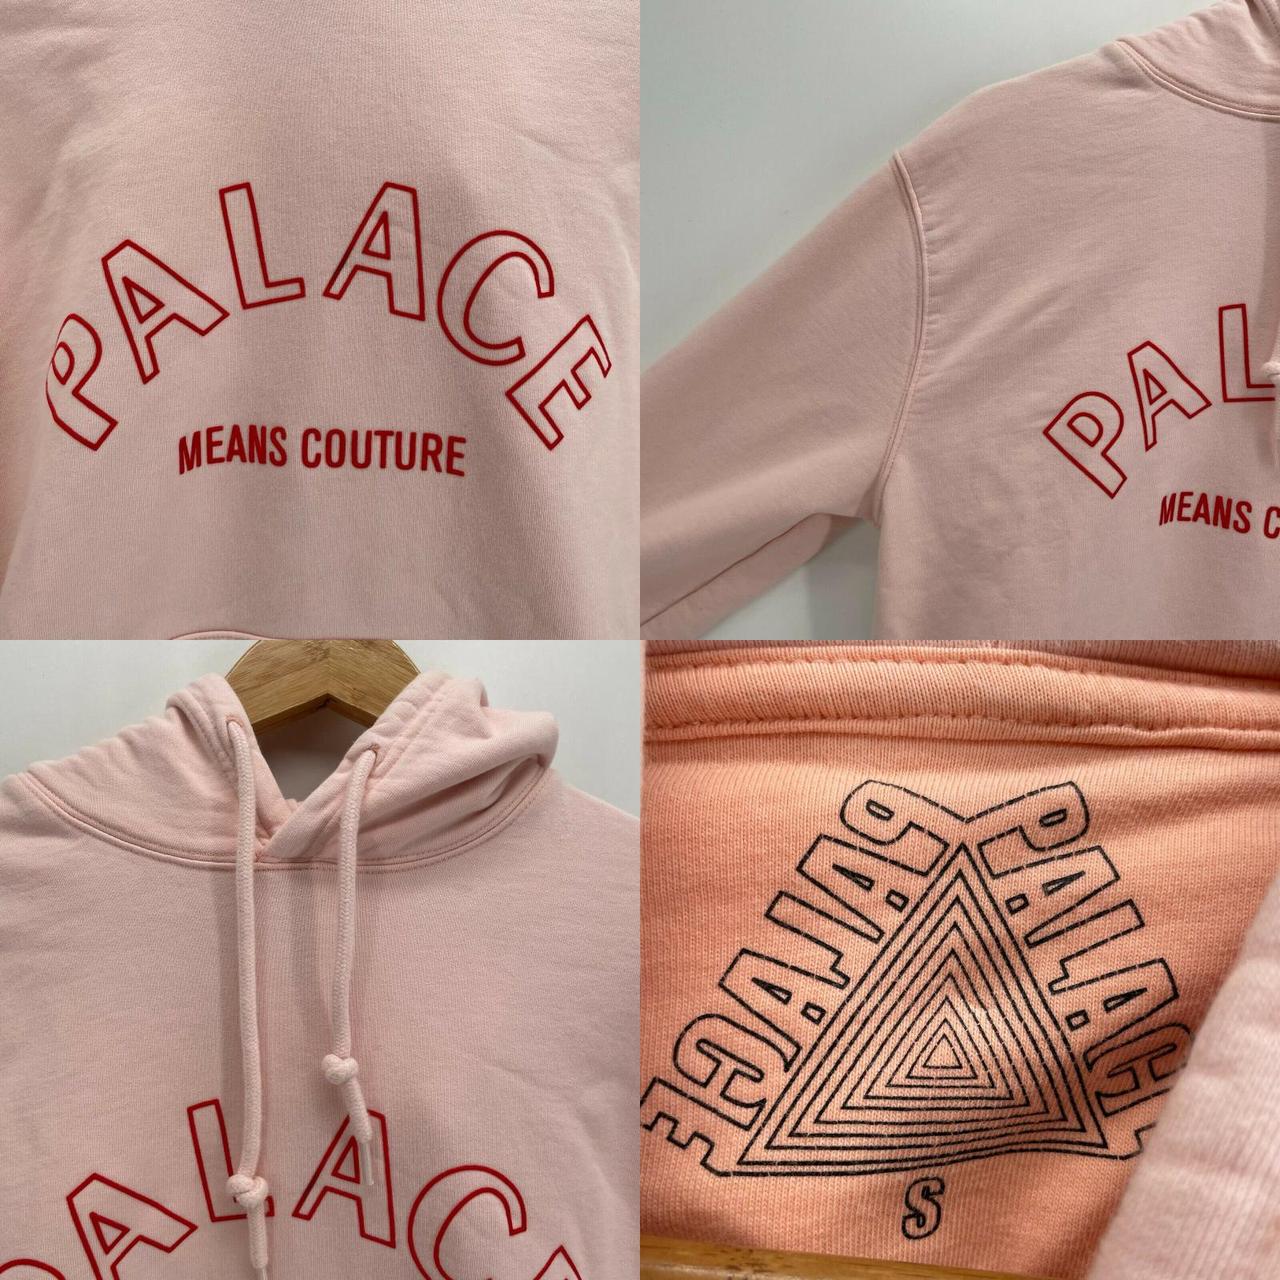 Product Image 4 - Palace Means Couture Hoodie Men's